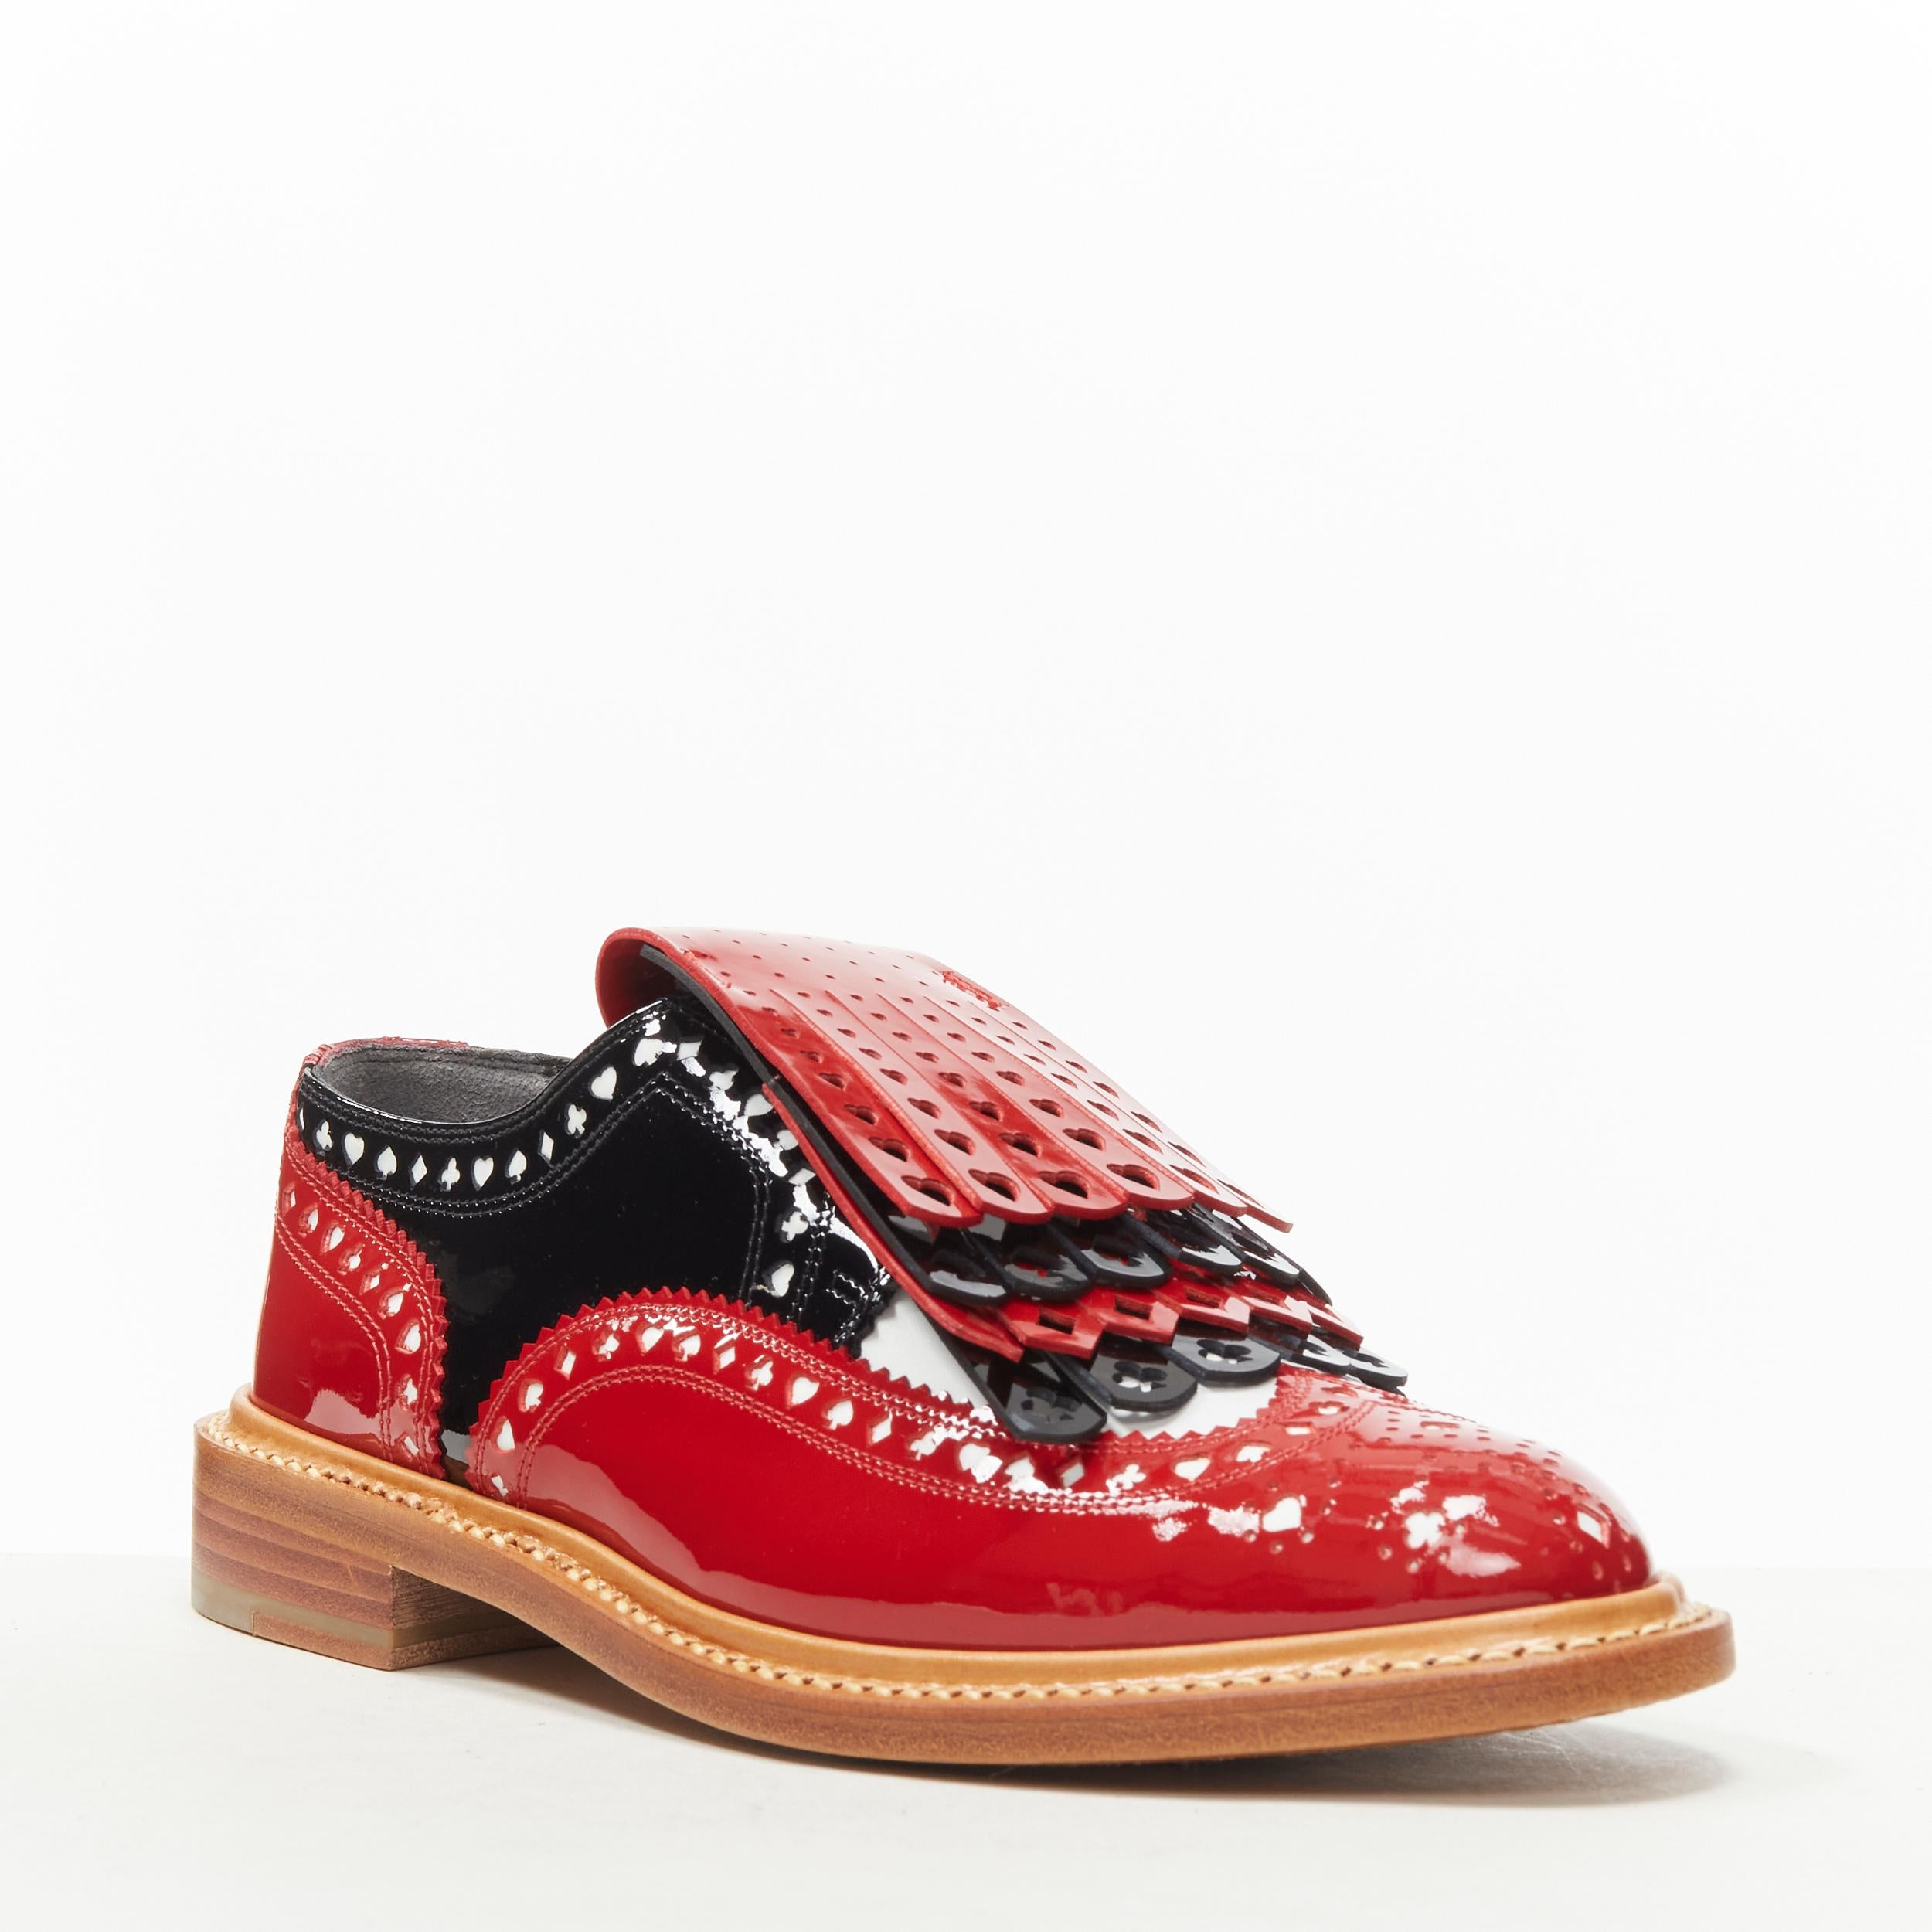 new ROBERT CLERGERIE DISNEY Card Suits cut out fringed red black brogue EU36
Brand: Robert Clergerie
Model: Royal
Material: Patent Leather
Color: Red
Pattern: Colorblocked
Closure: Lace Up
Extra Detail: Red black patent leather upper. Card Suits